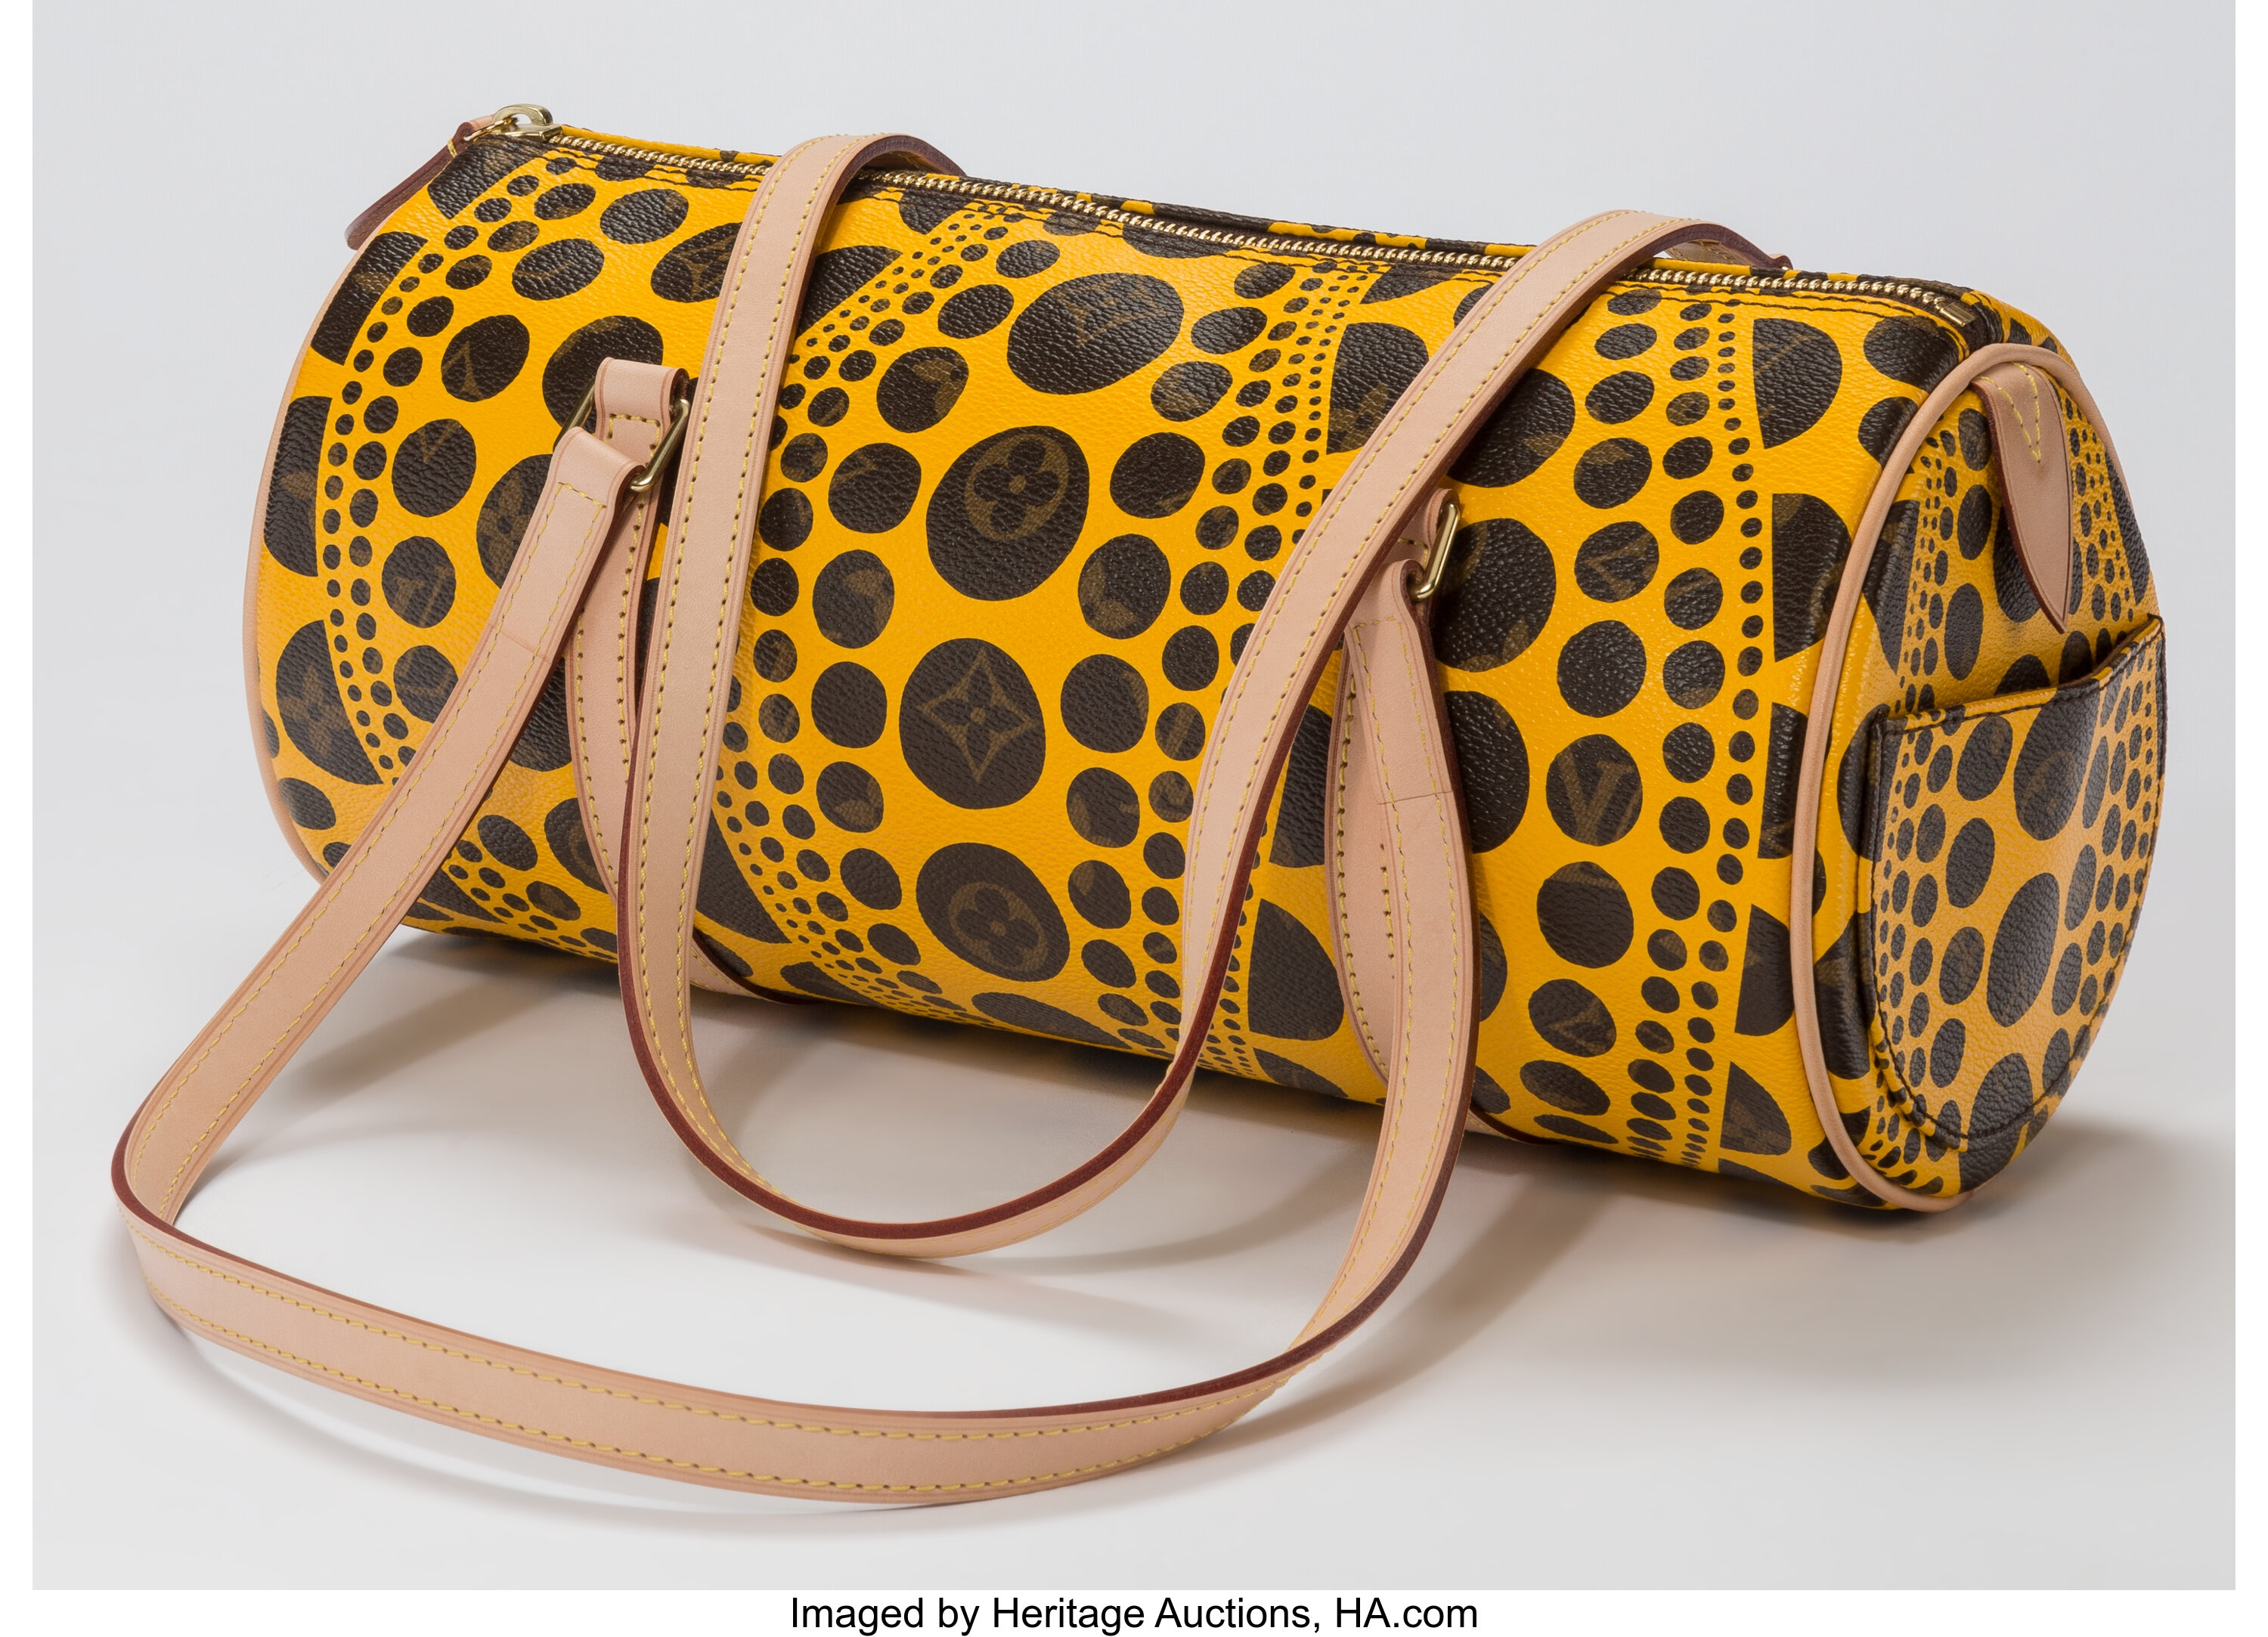 Is Louis Vuitton Partnering with Yayoi Kusama To Launch NFTs?